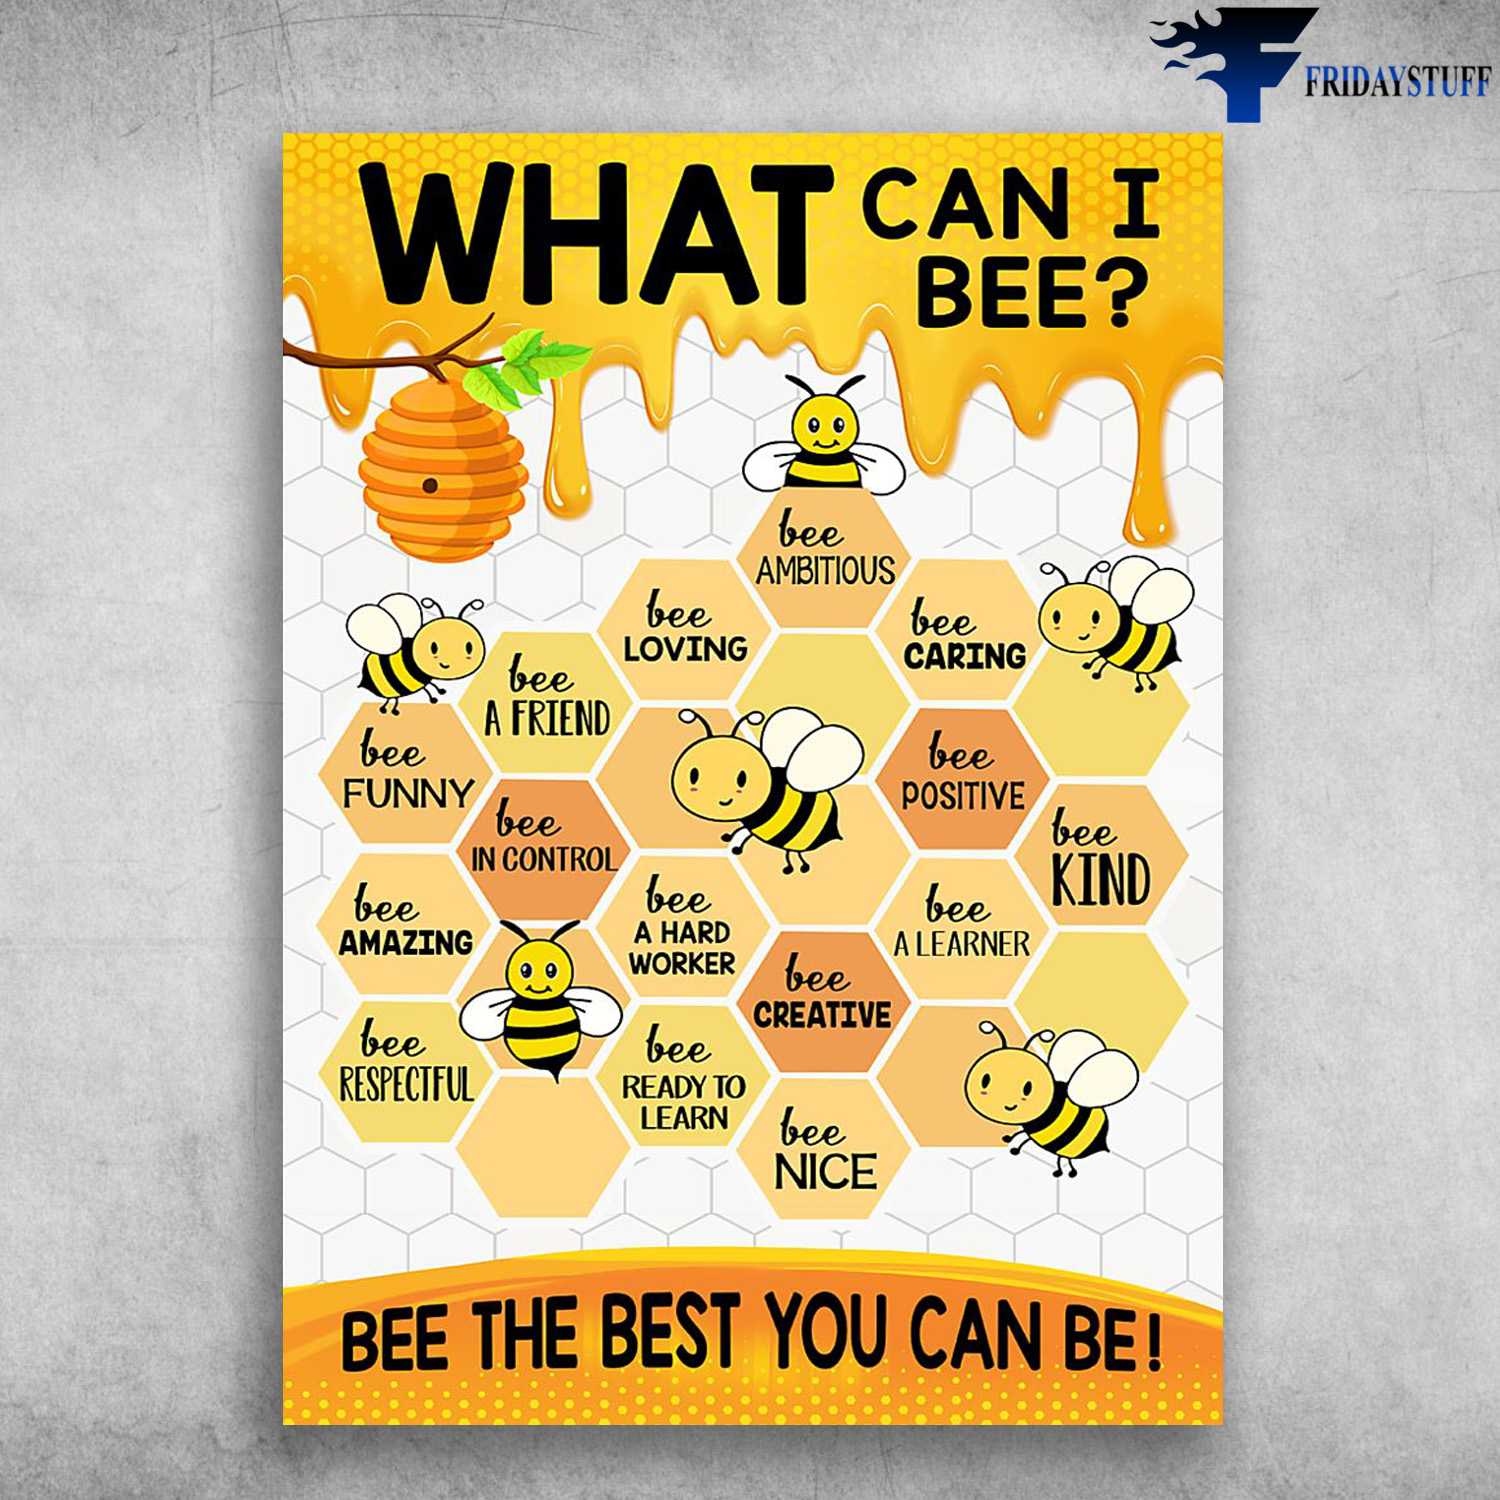 Bee Poster, What Can I Bee, Bee Loving, Bee A Friend, Be Funny, Bee In Control, Bee Amazing, Bee Nice